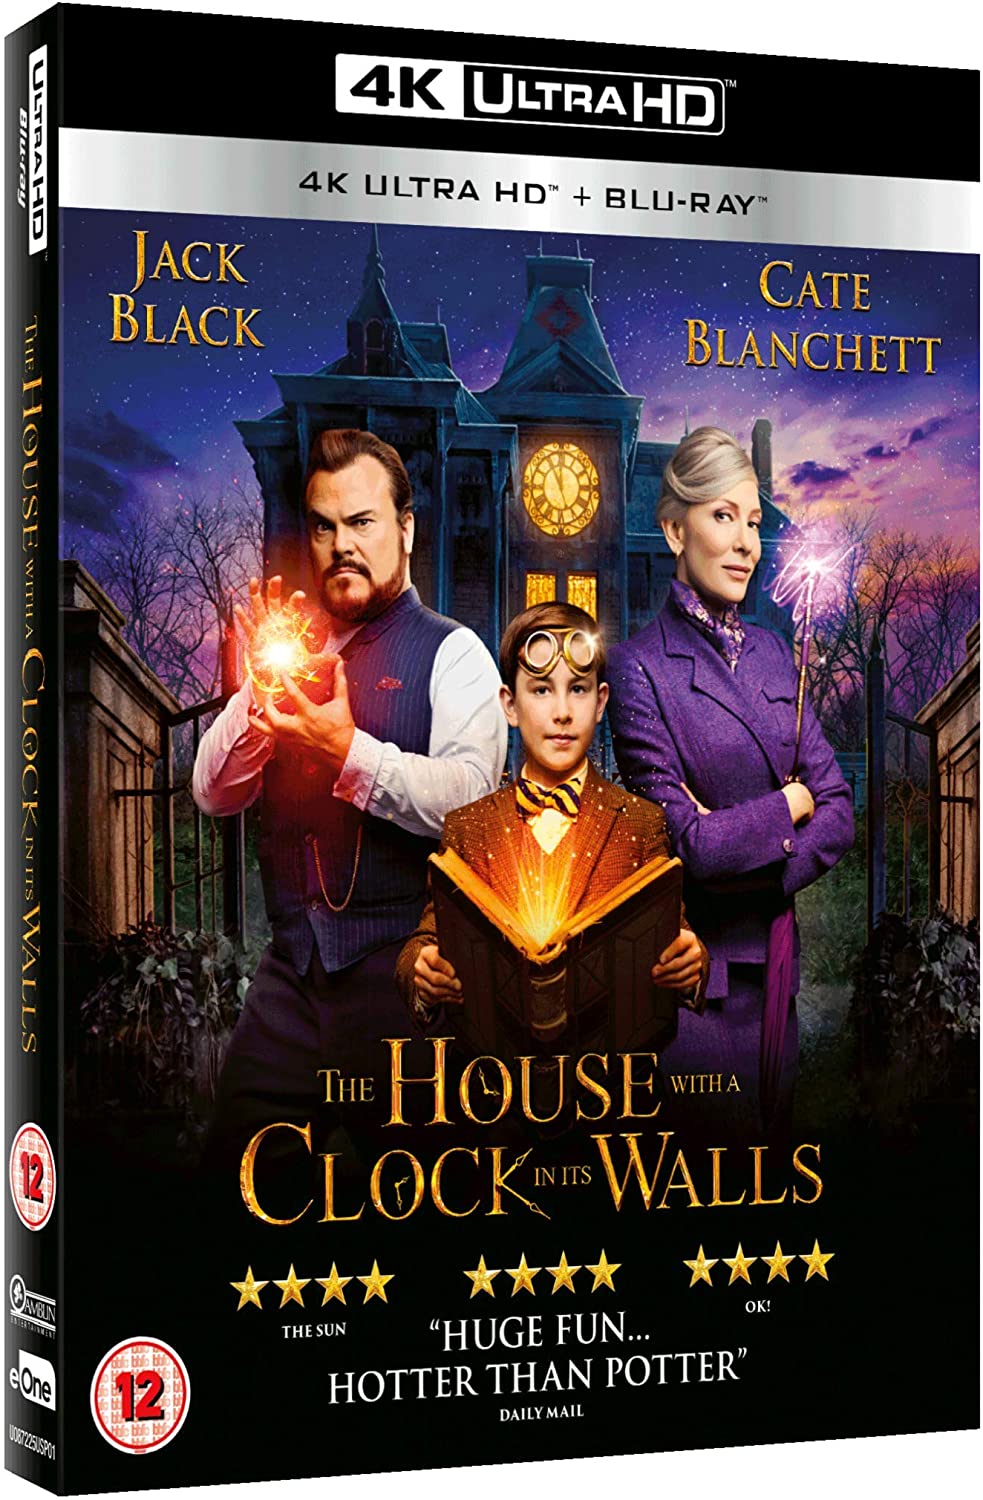 The House with a Clock in its Walls [2018] (4K Ultra HD + Blu-ray)